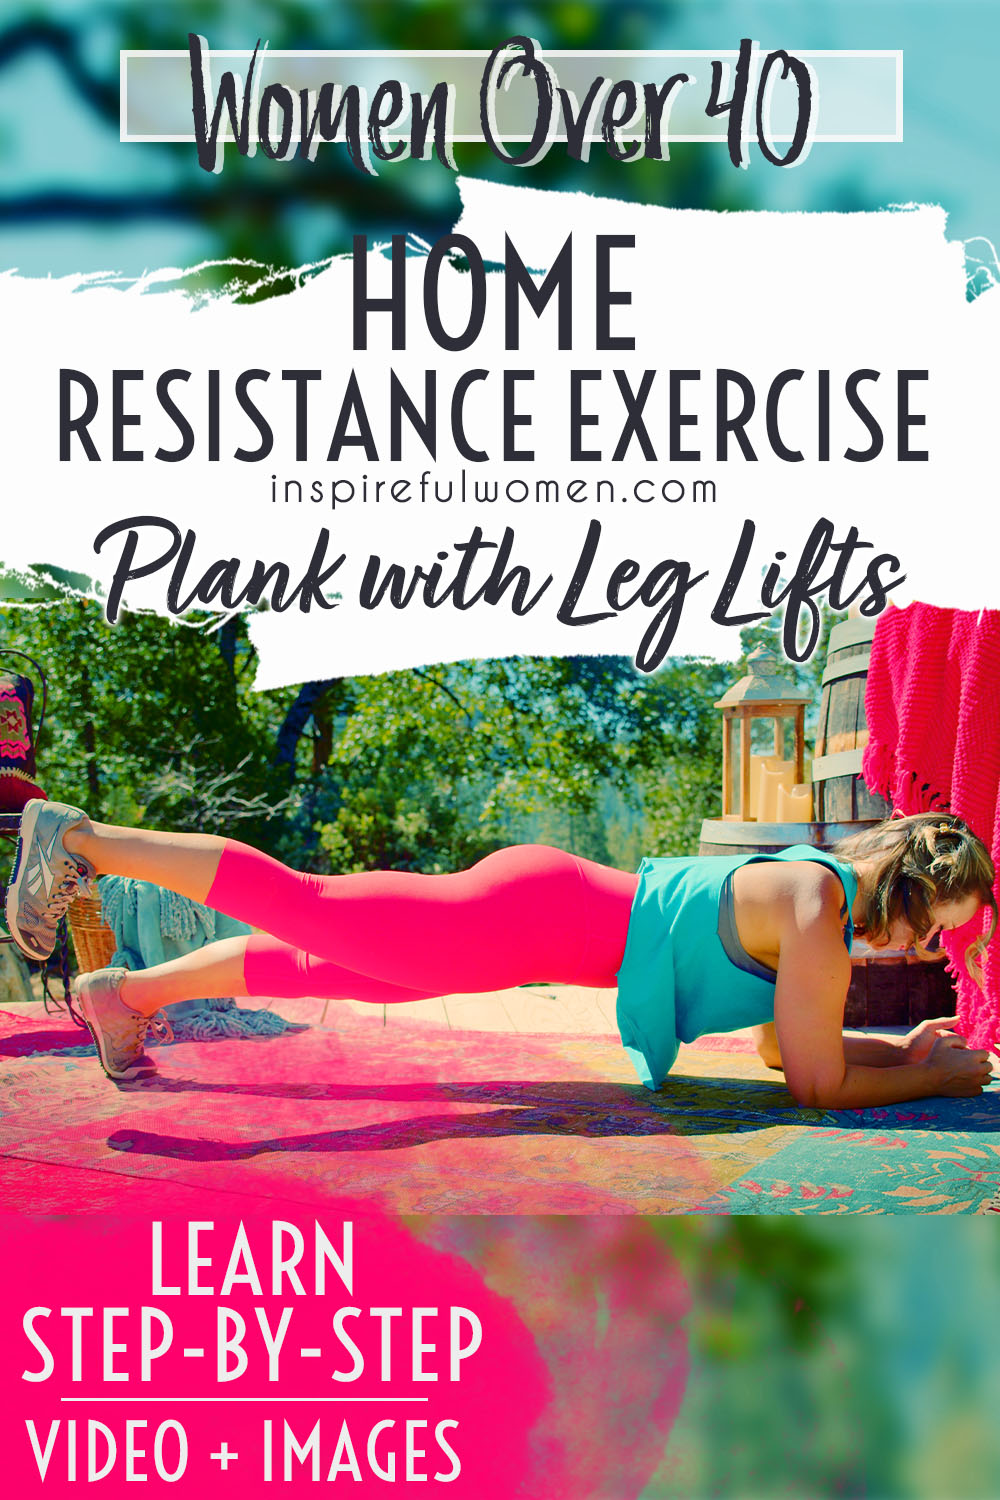 plank-leg-lifts-prone-plank-variation-no-weight-ab-core-strength-exercise-women-40+